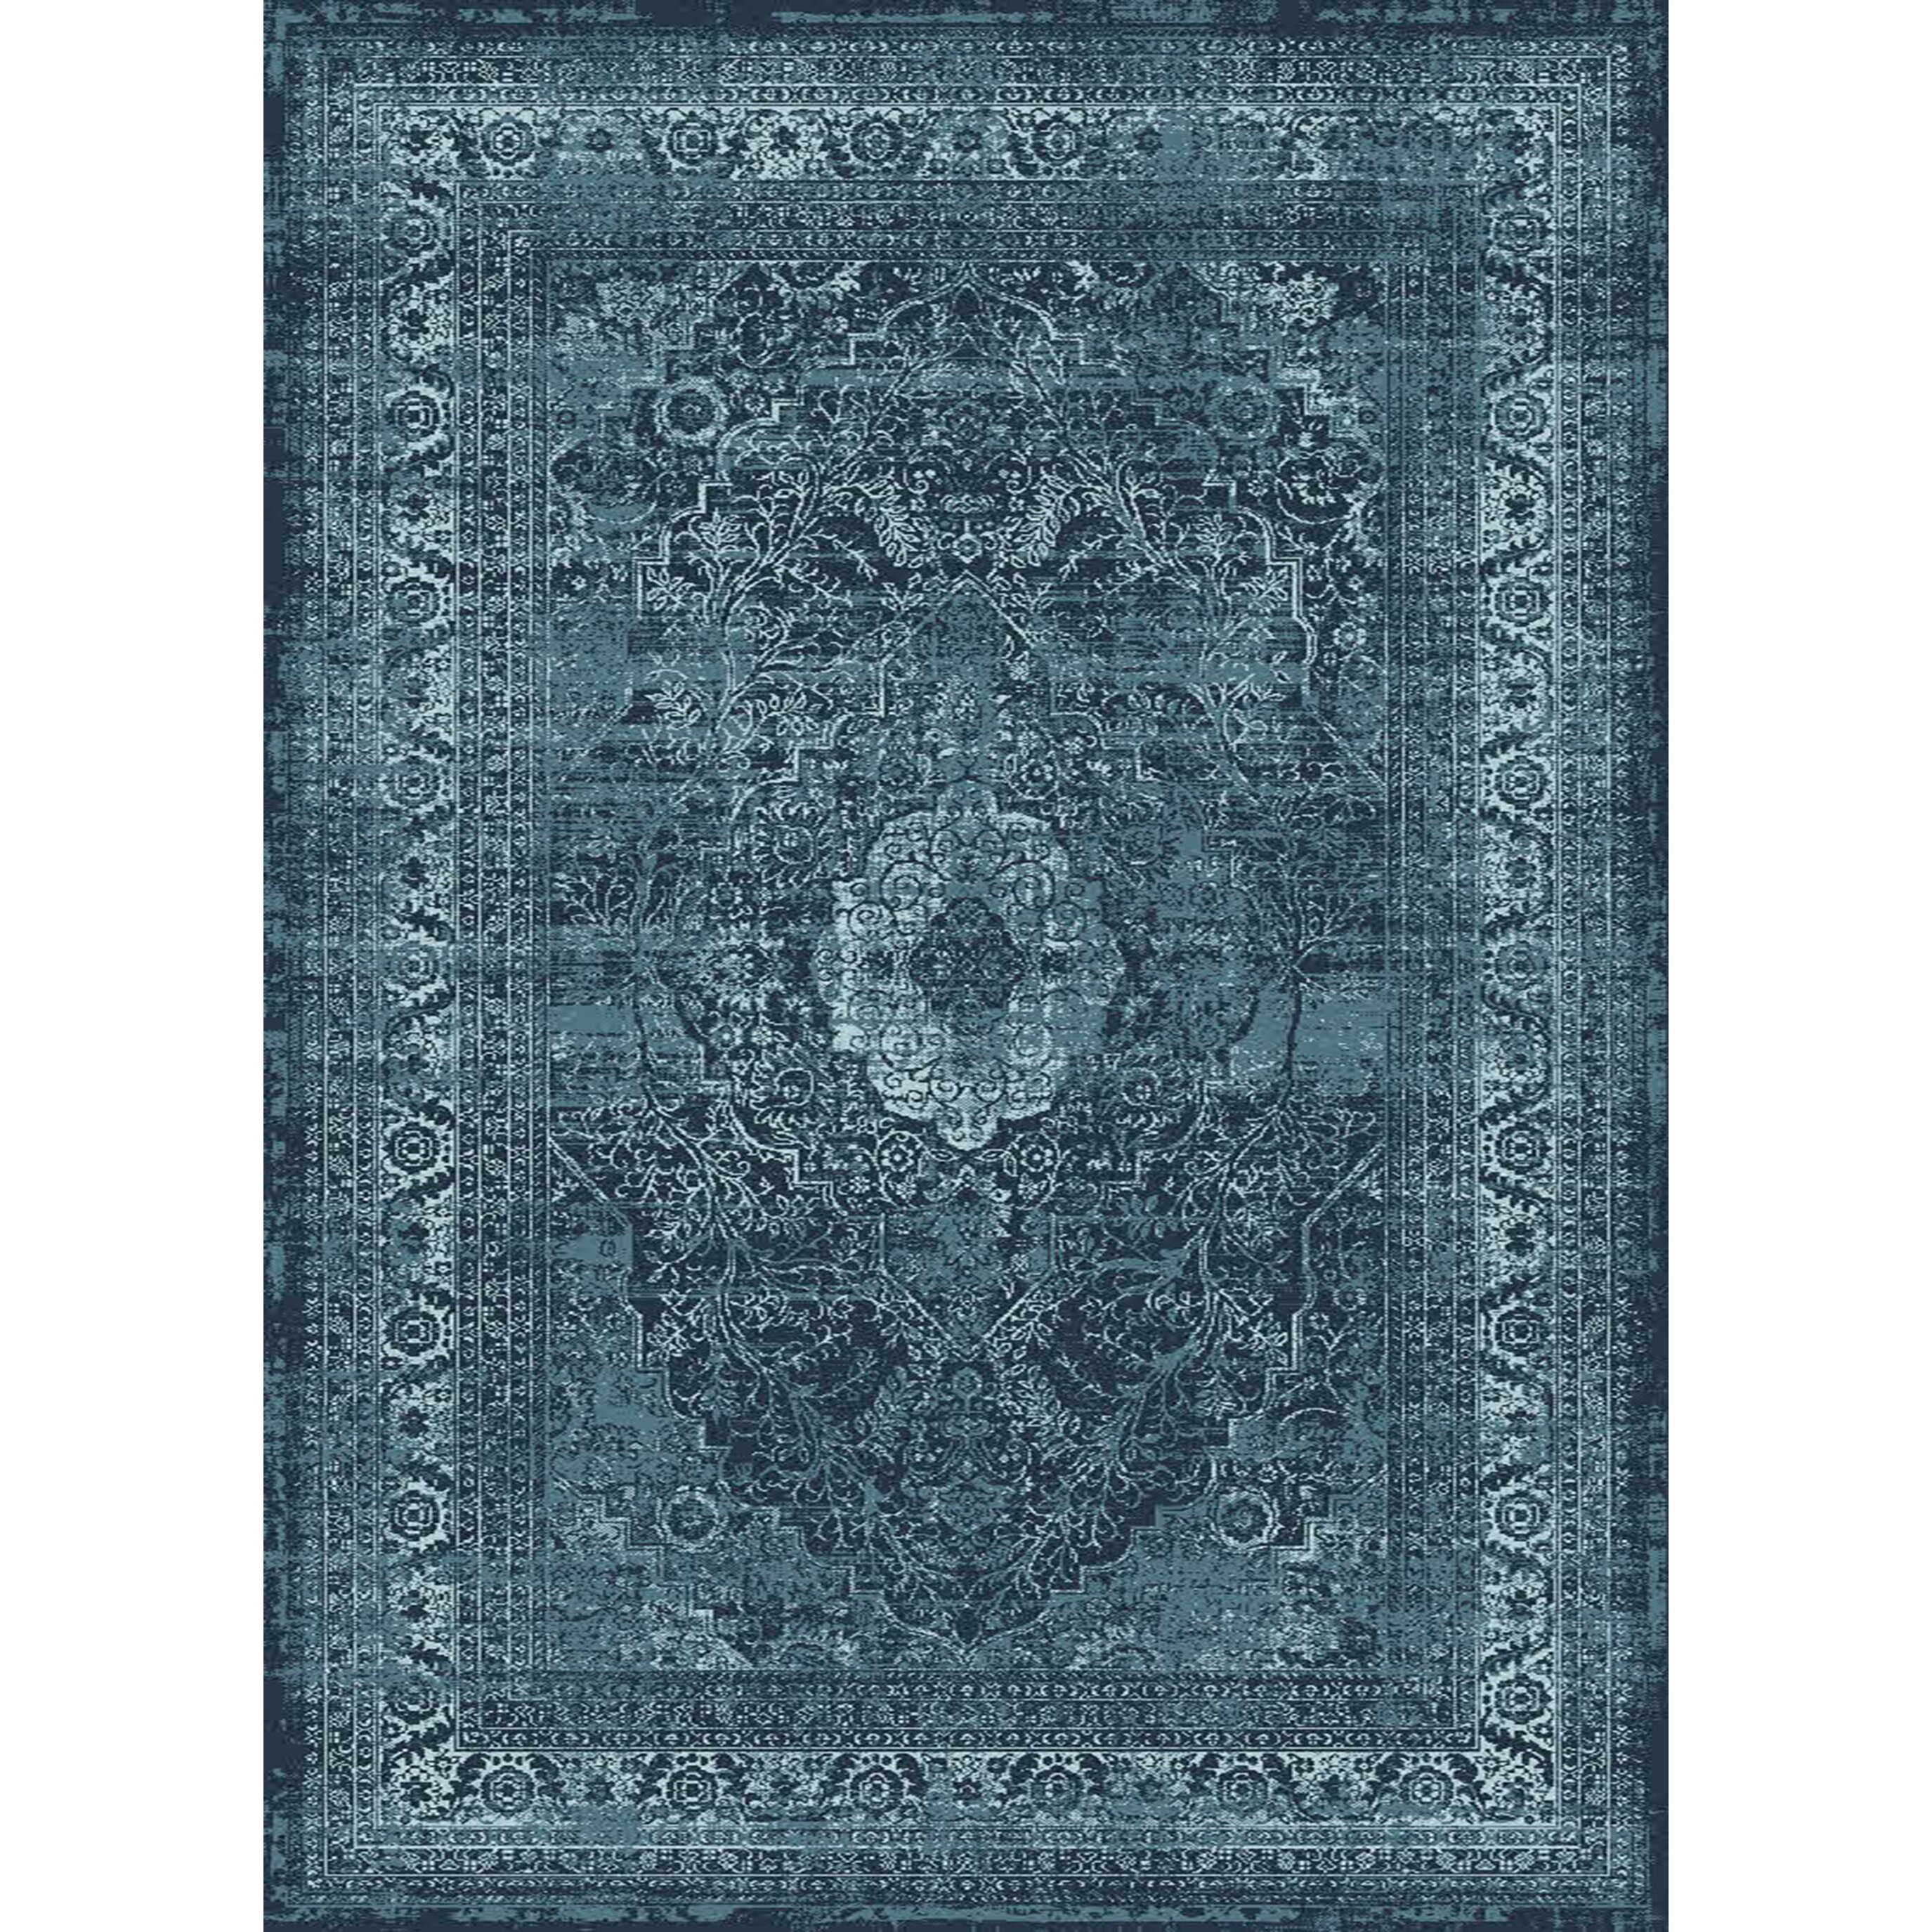 Teal Area Rugs Teal Blue Area Rugs All Old Homes Revival Area